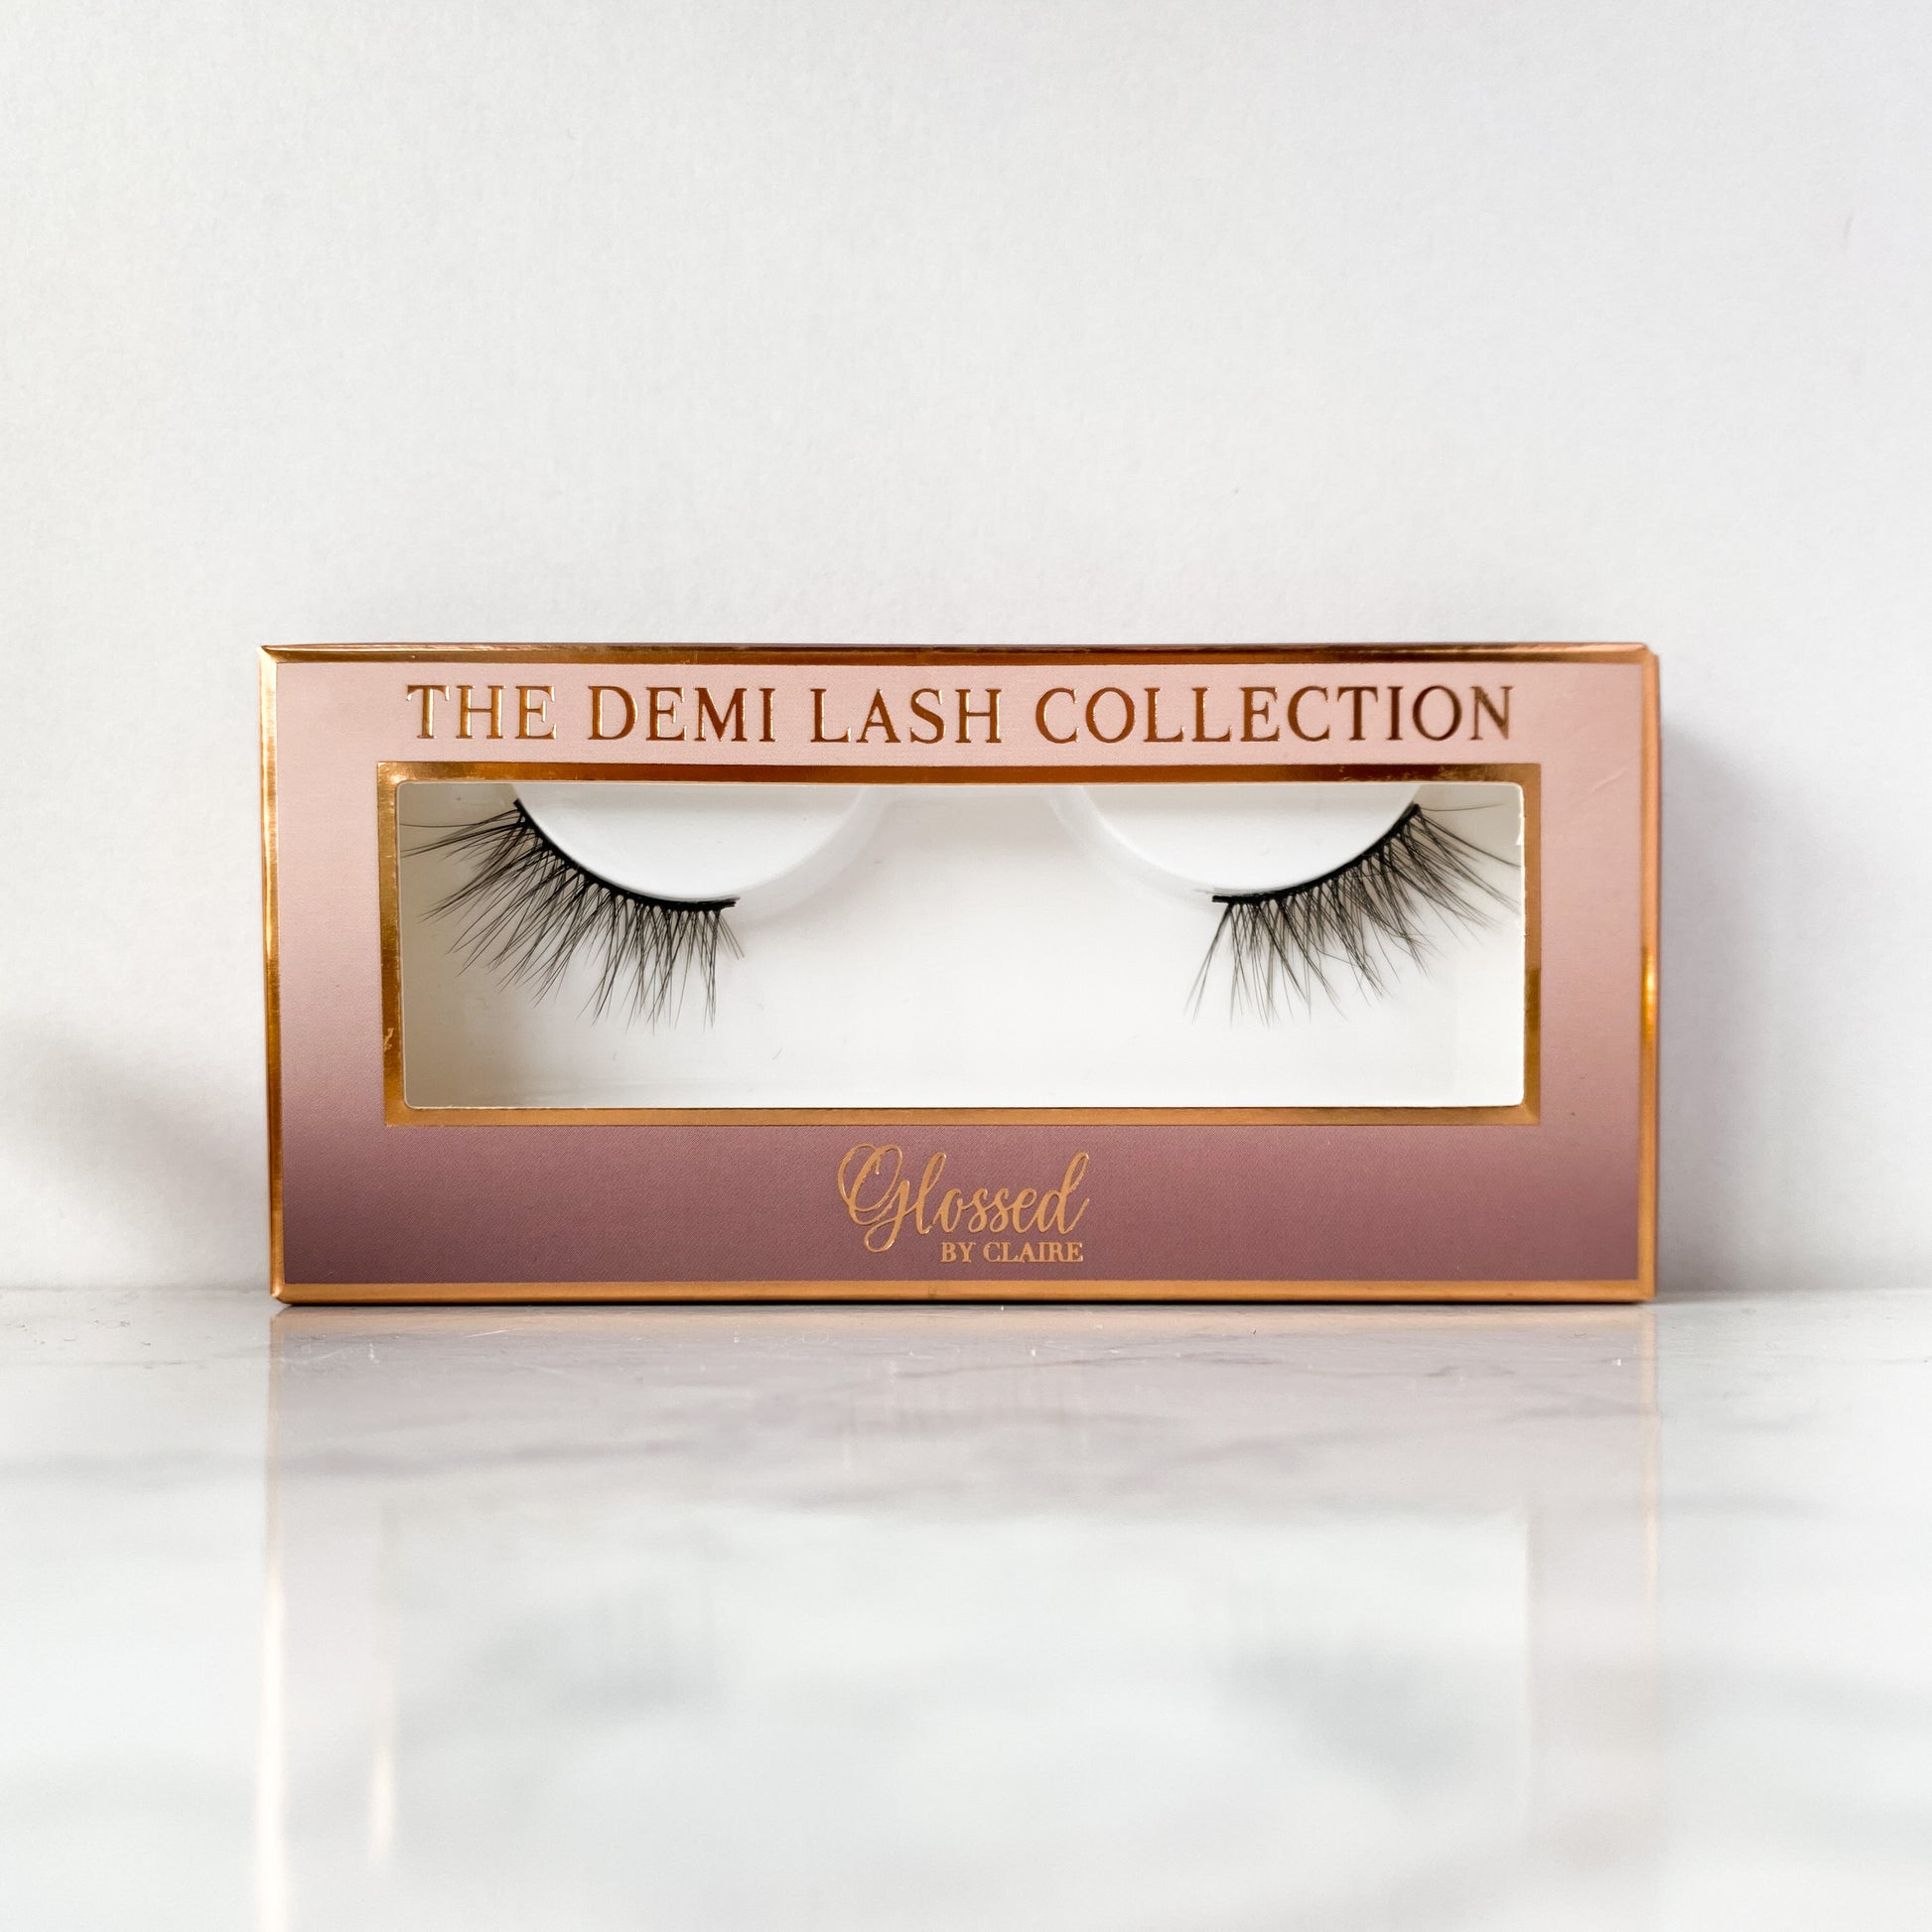 DL4 Half Lash Glossed By Claire in box